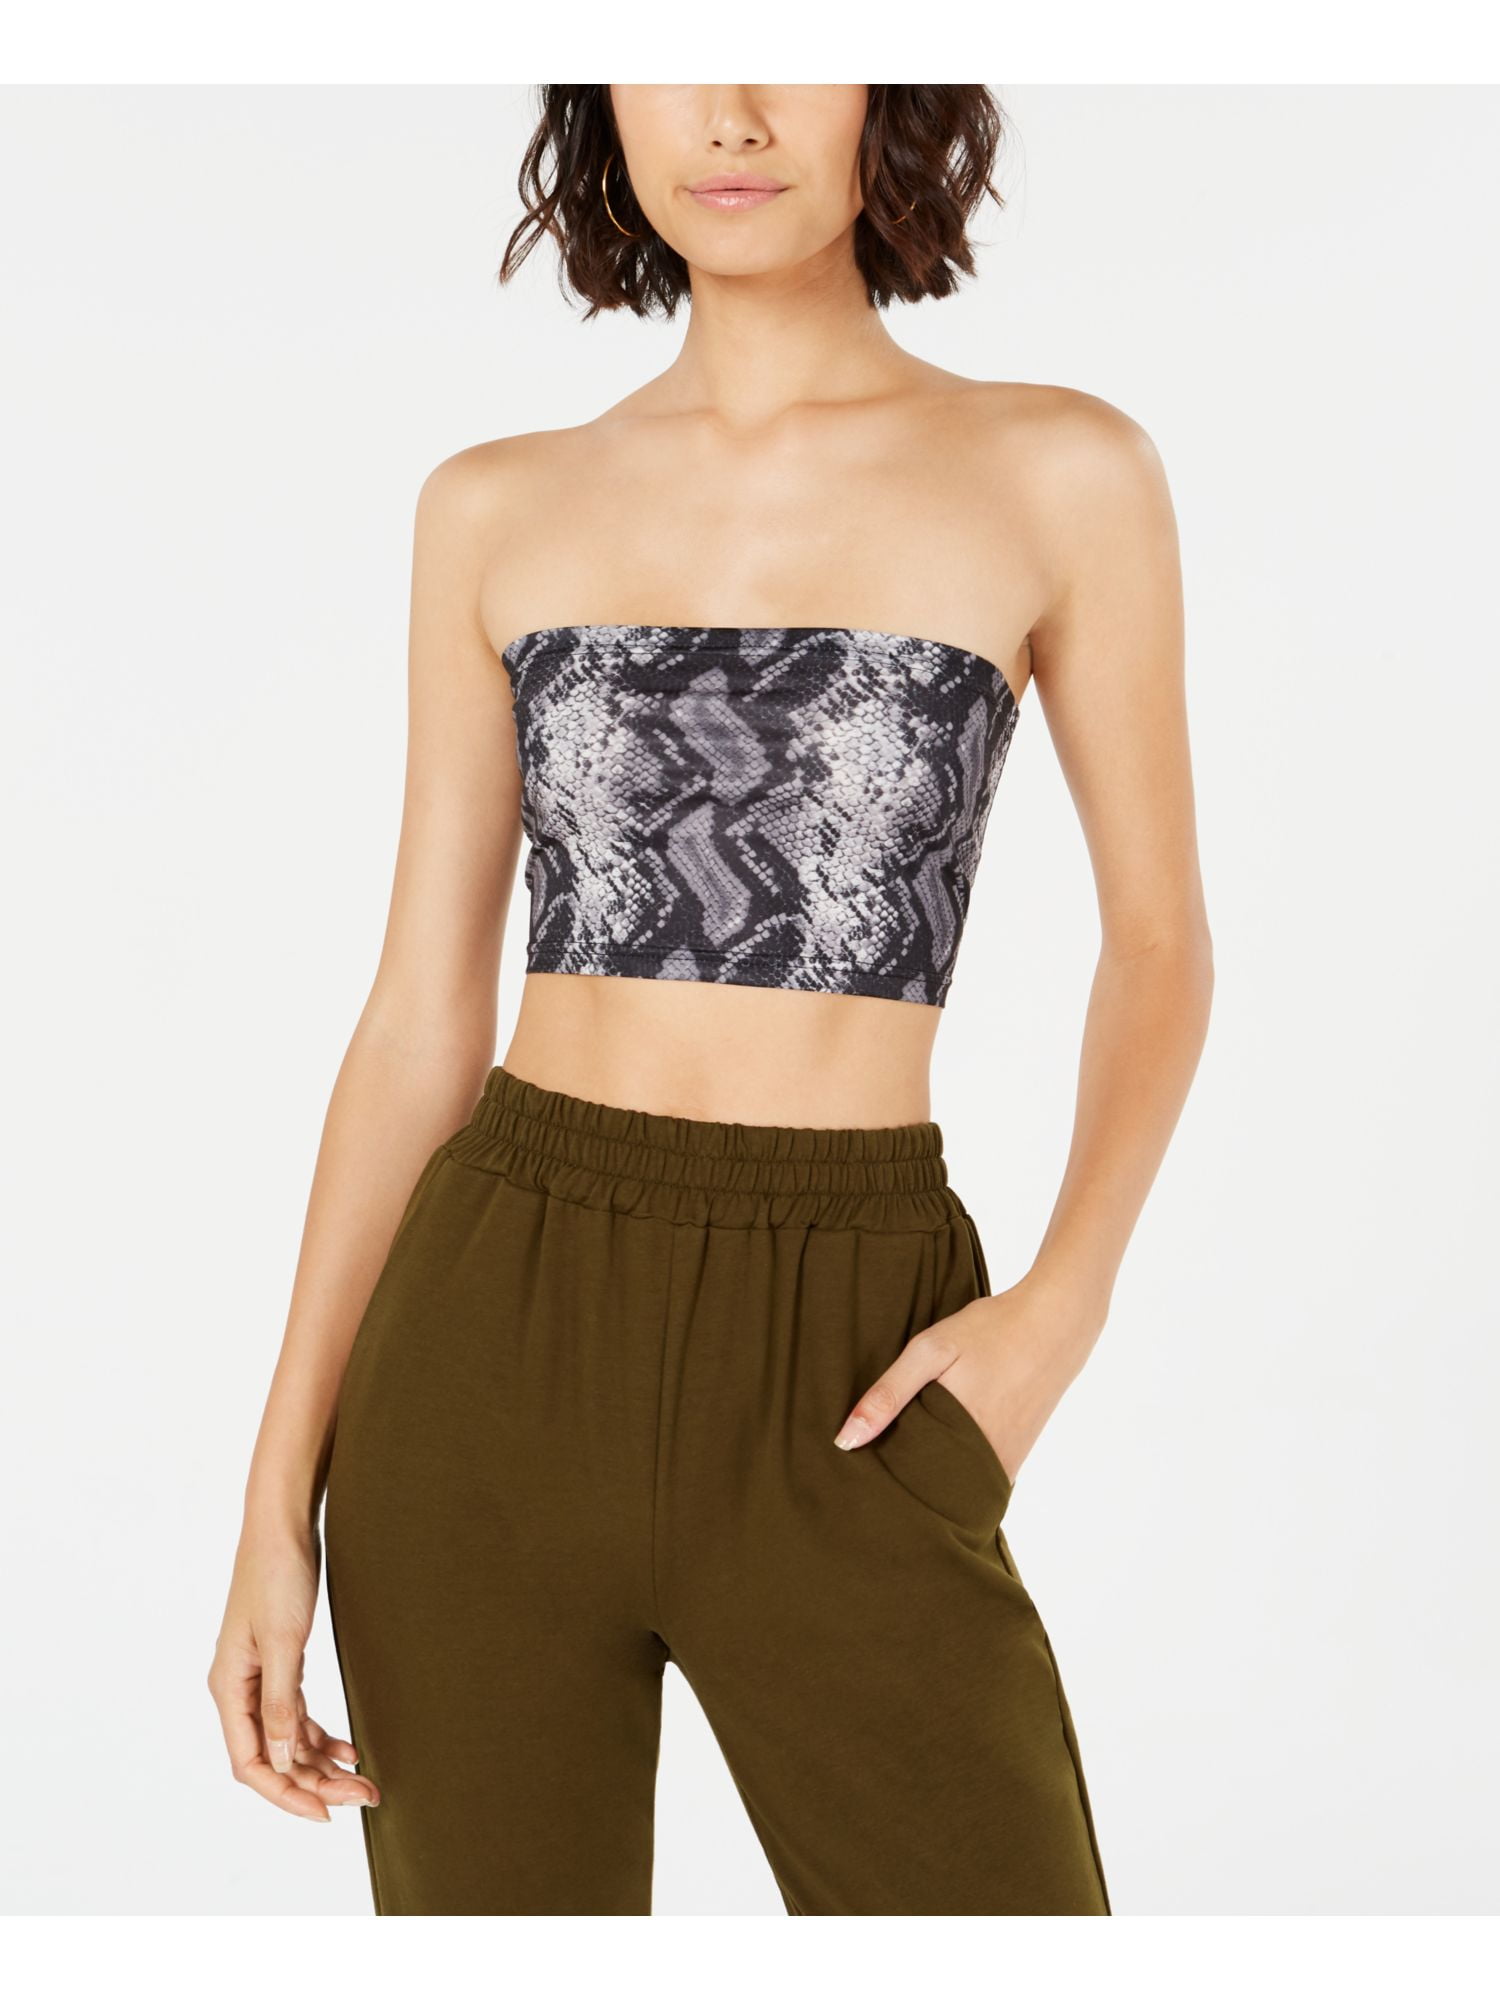 Stretch Is Comfort Women's Plus Size Crop Tube Top